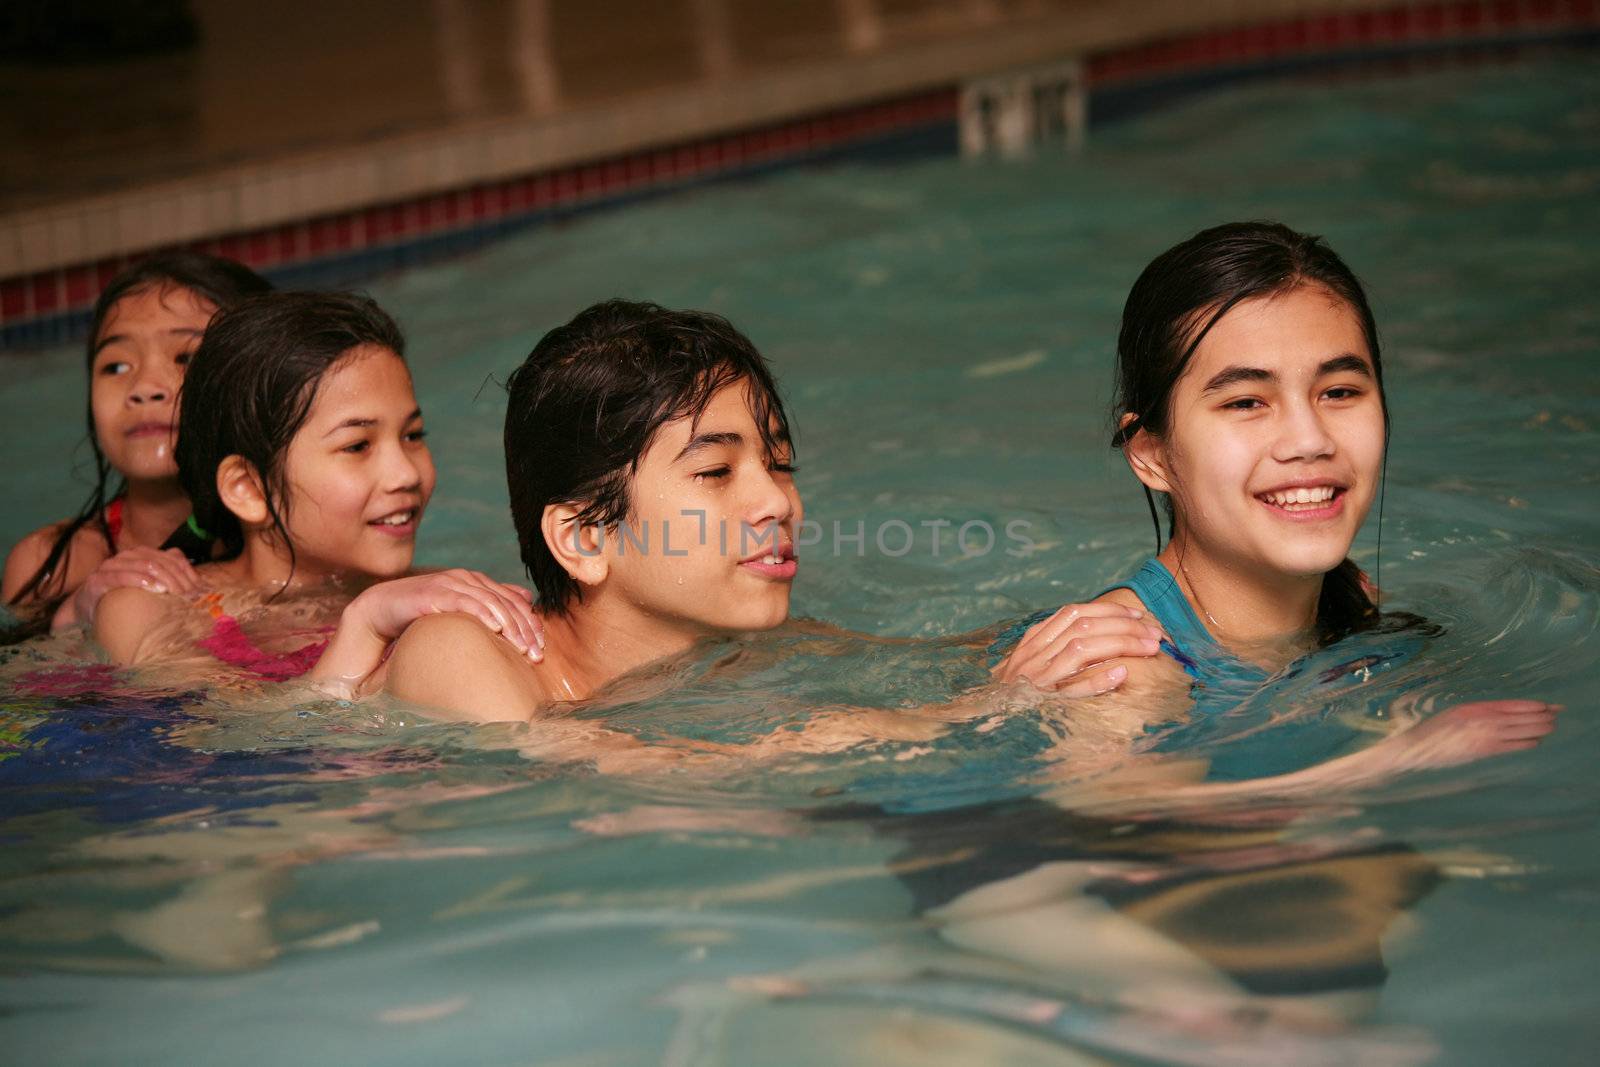 Four children swimming together, having fun in pool